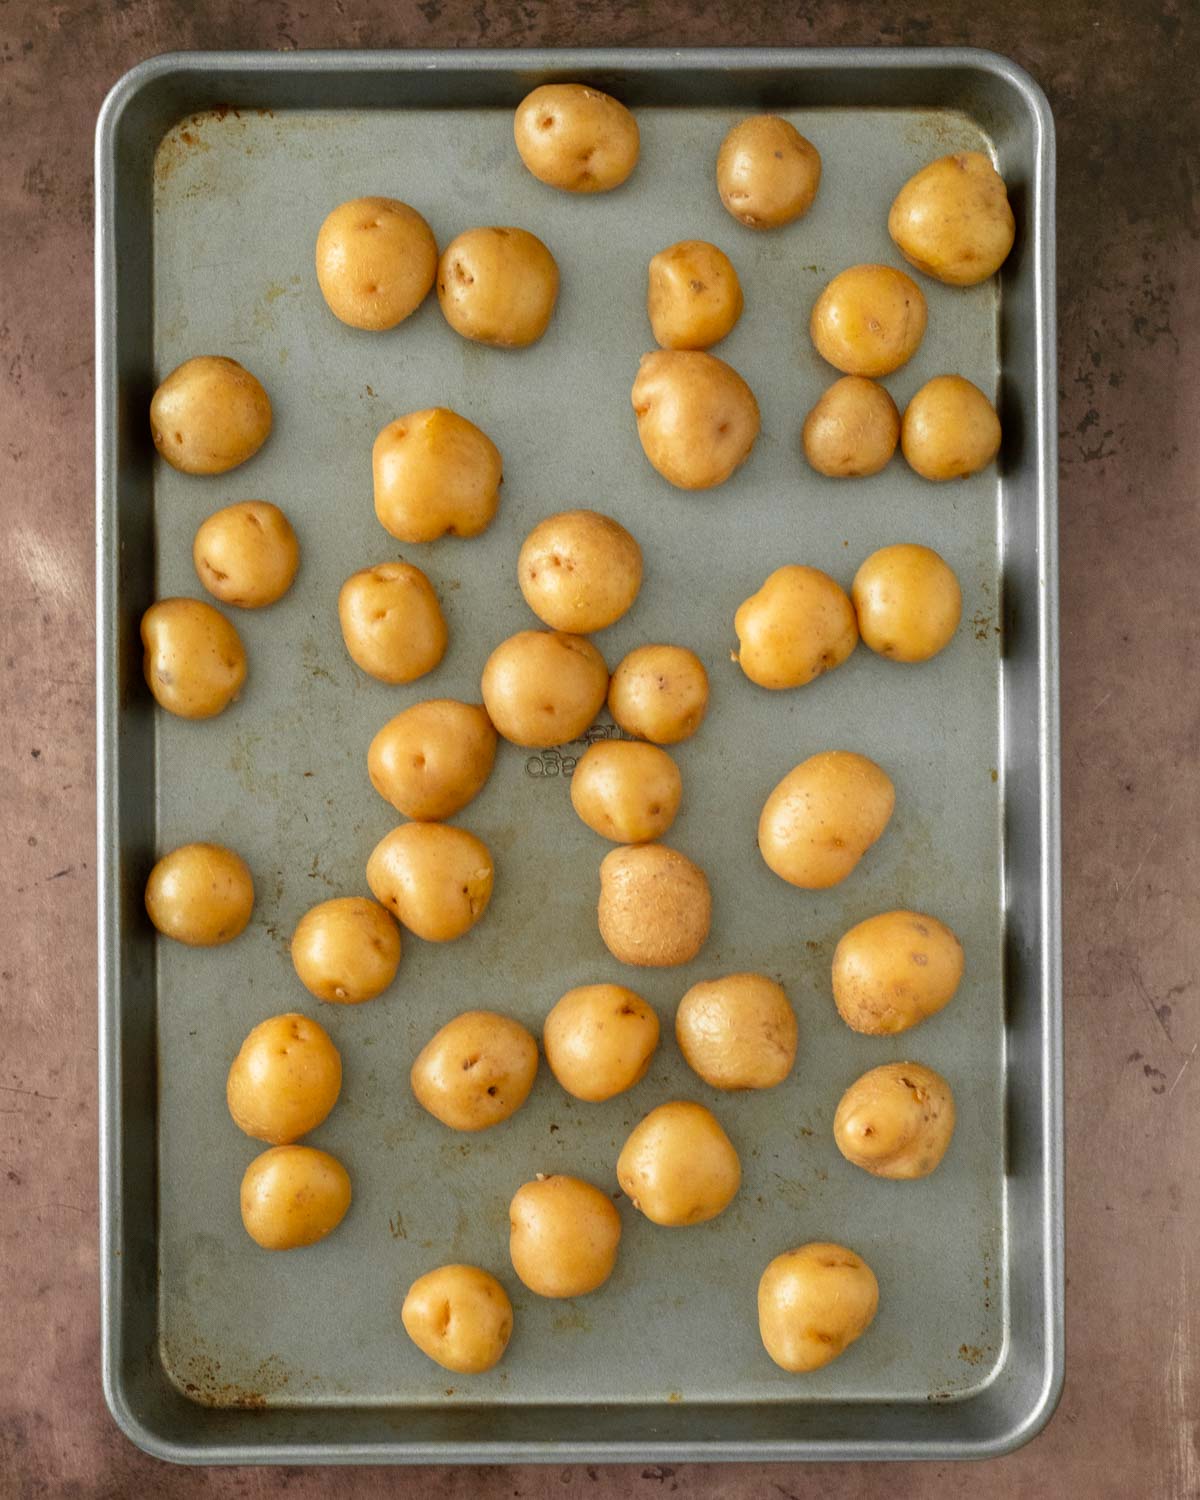 Step 2. Place the potatoes on a sheet pan